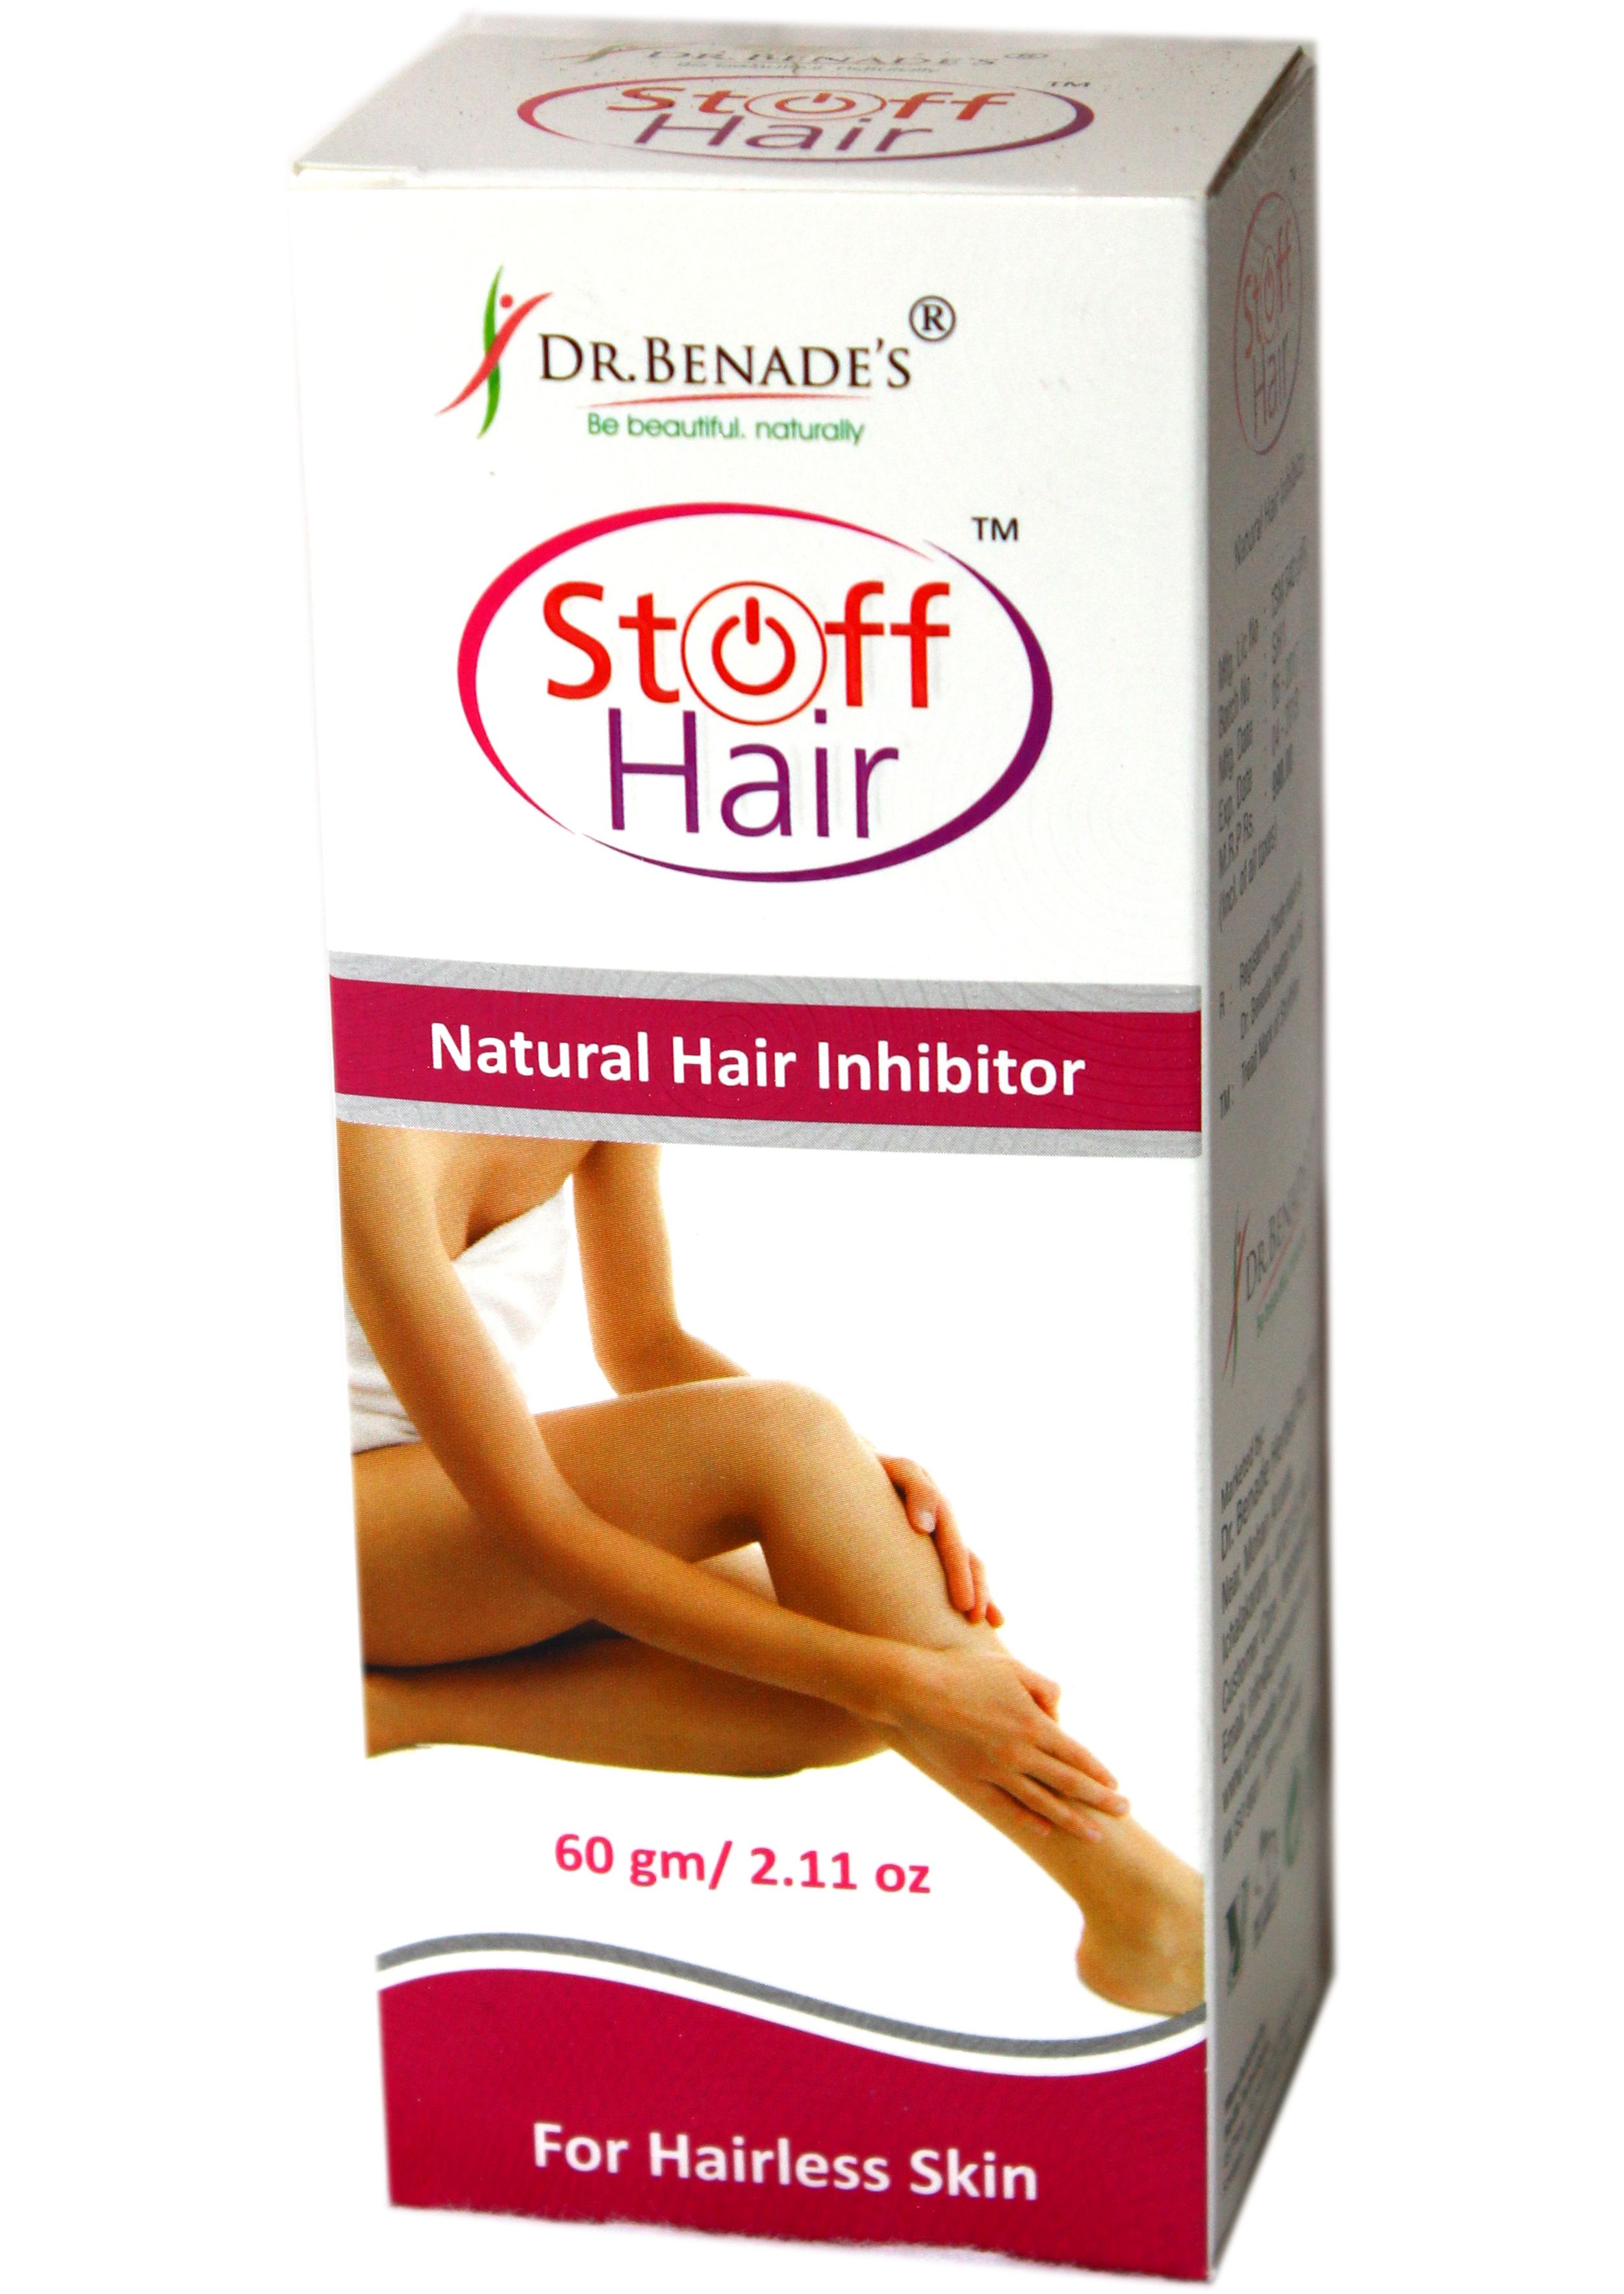 's StoffHair Natural Hair Inhibitor Permanent Hair Removal Cream  60 gm: Buy 's StoffHair Natural Hair Inhibitor Permanent Hair  Removal Cream 60 gm at Best Prices in India - Snapdeal